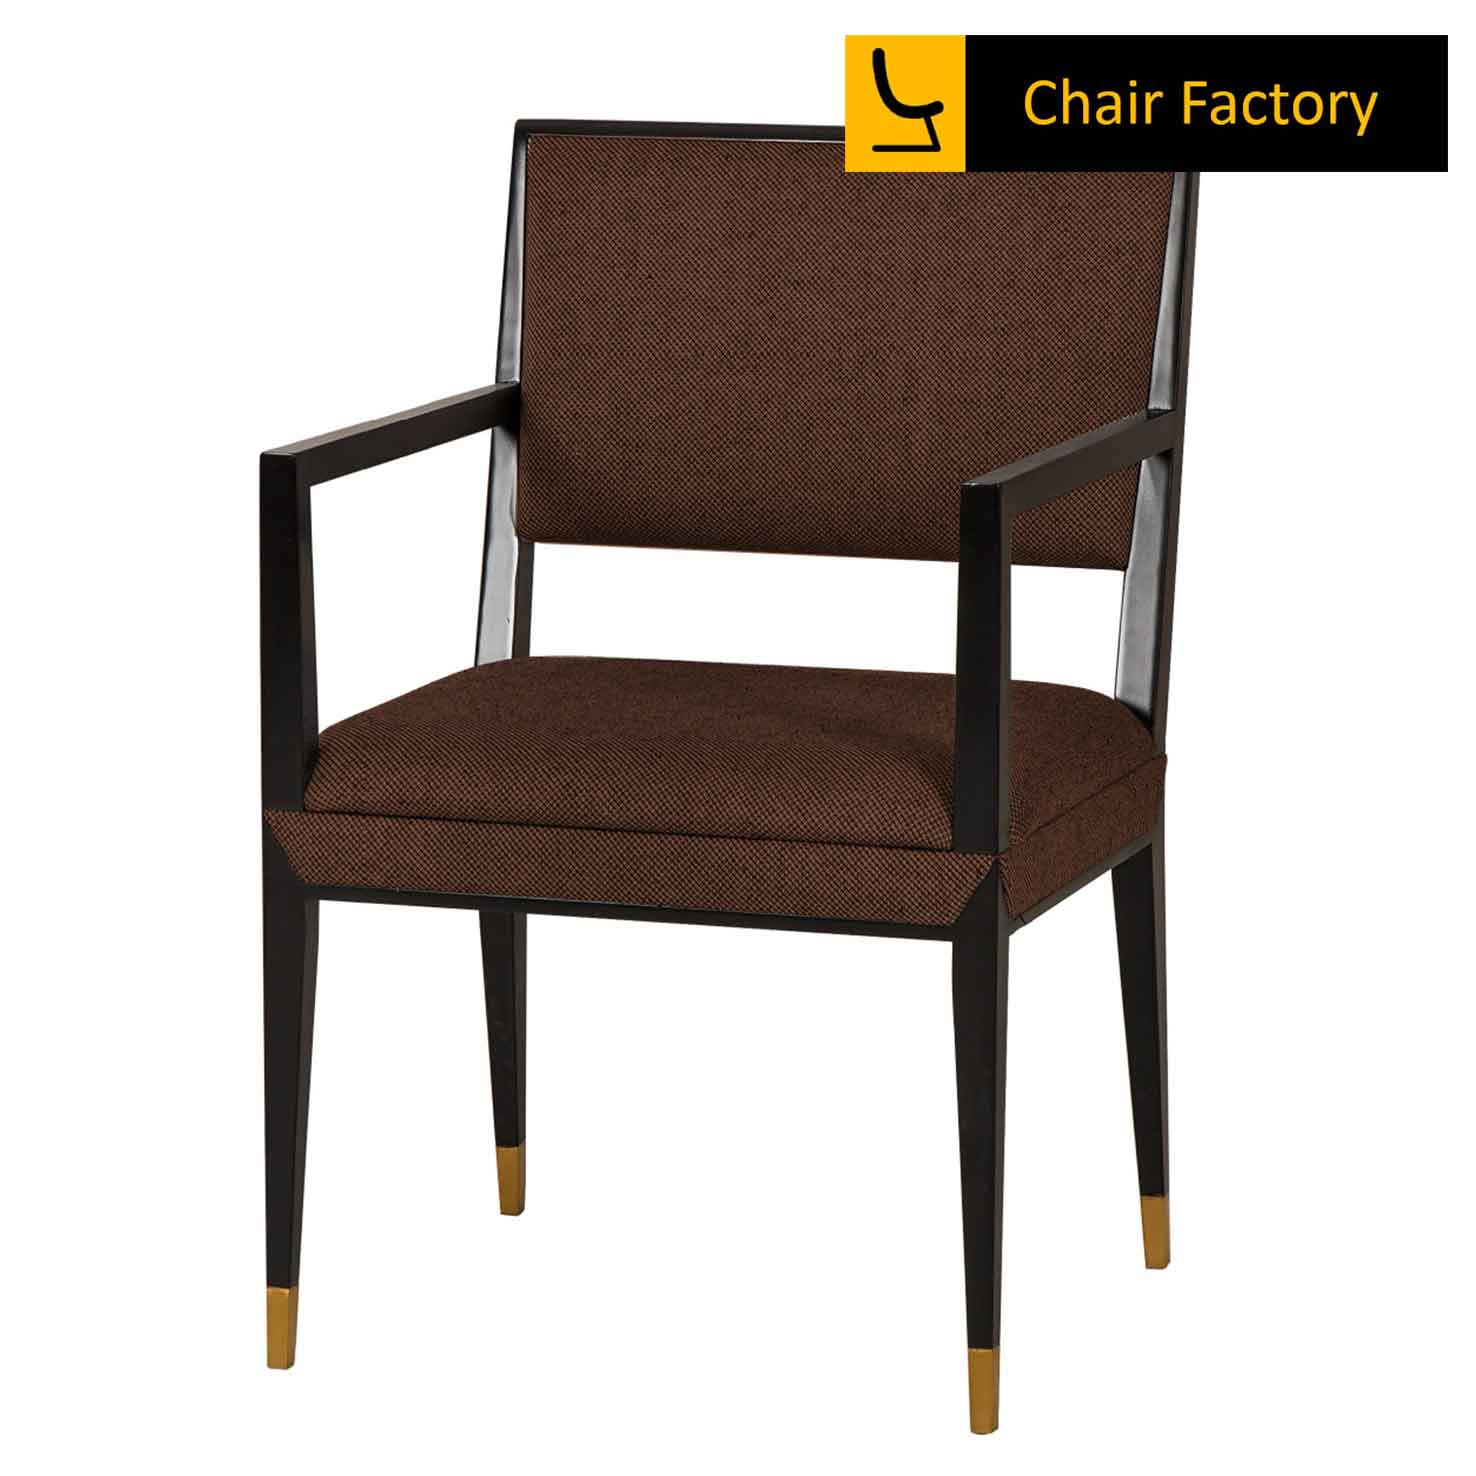 RioPelle brown dining chair